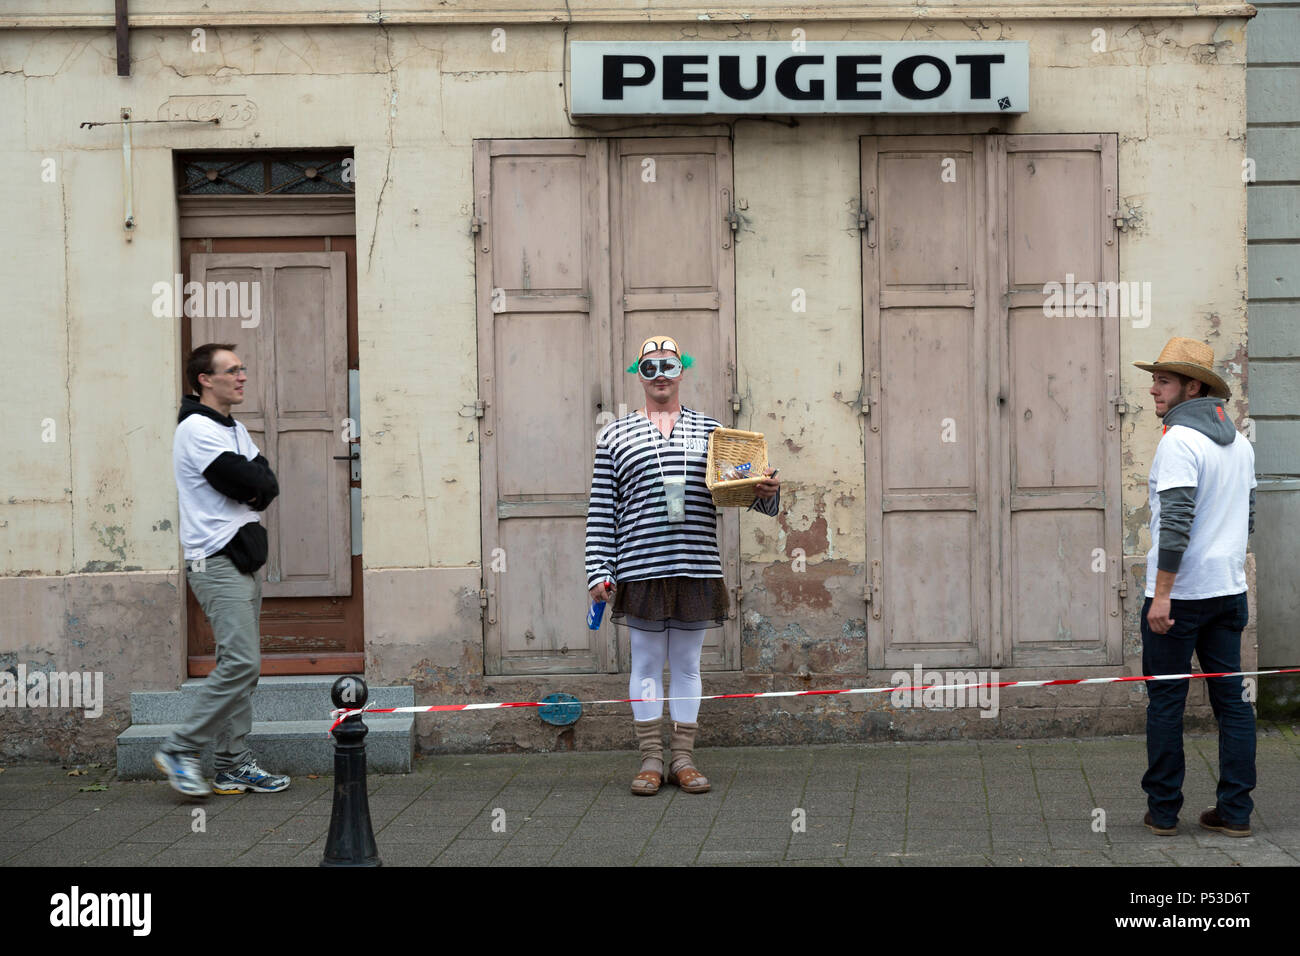 France - Street scene with disguised man and Peugeot lettering Stock Photo